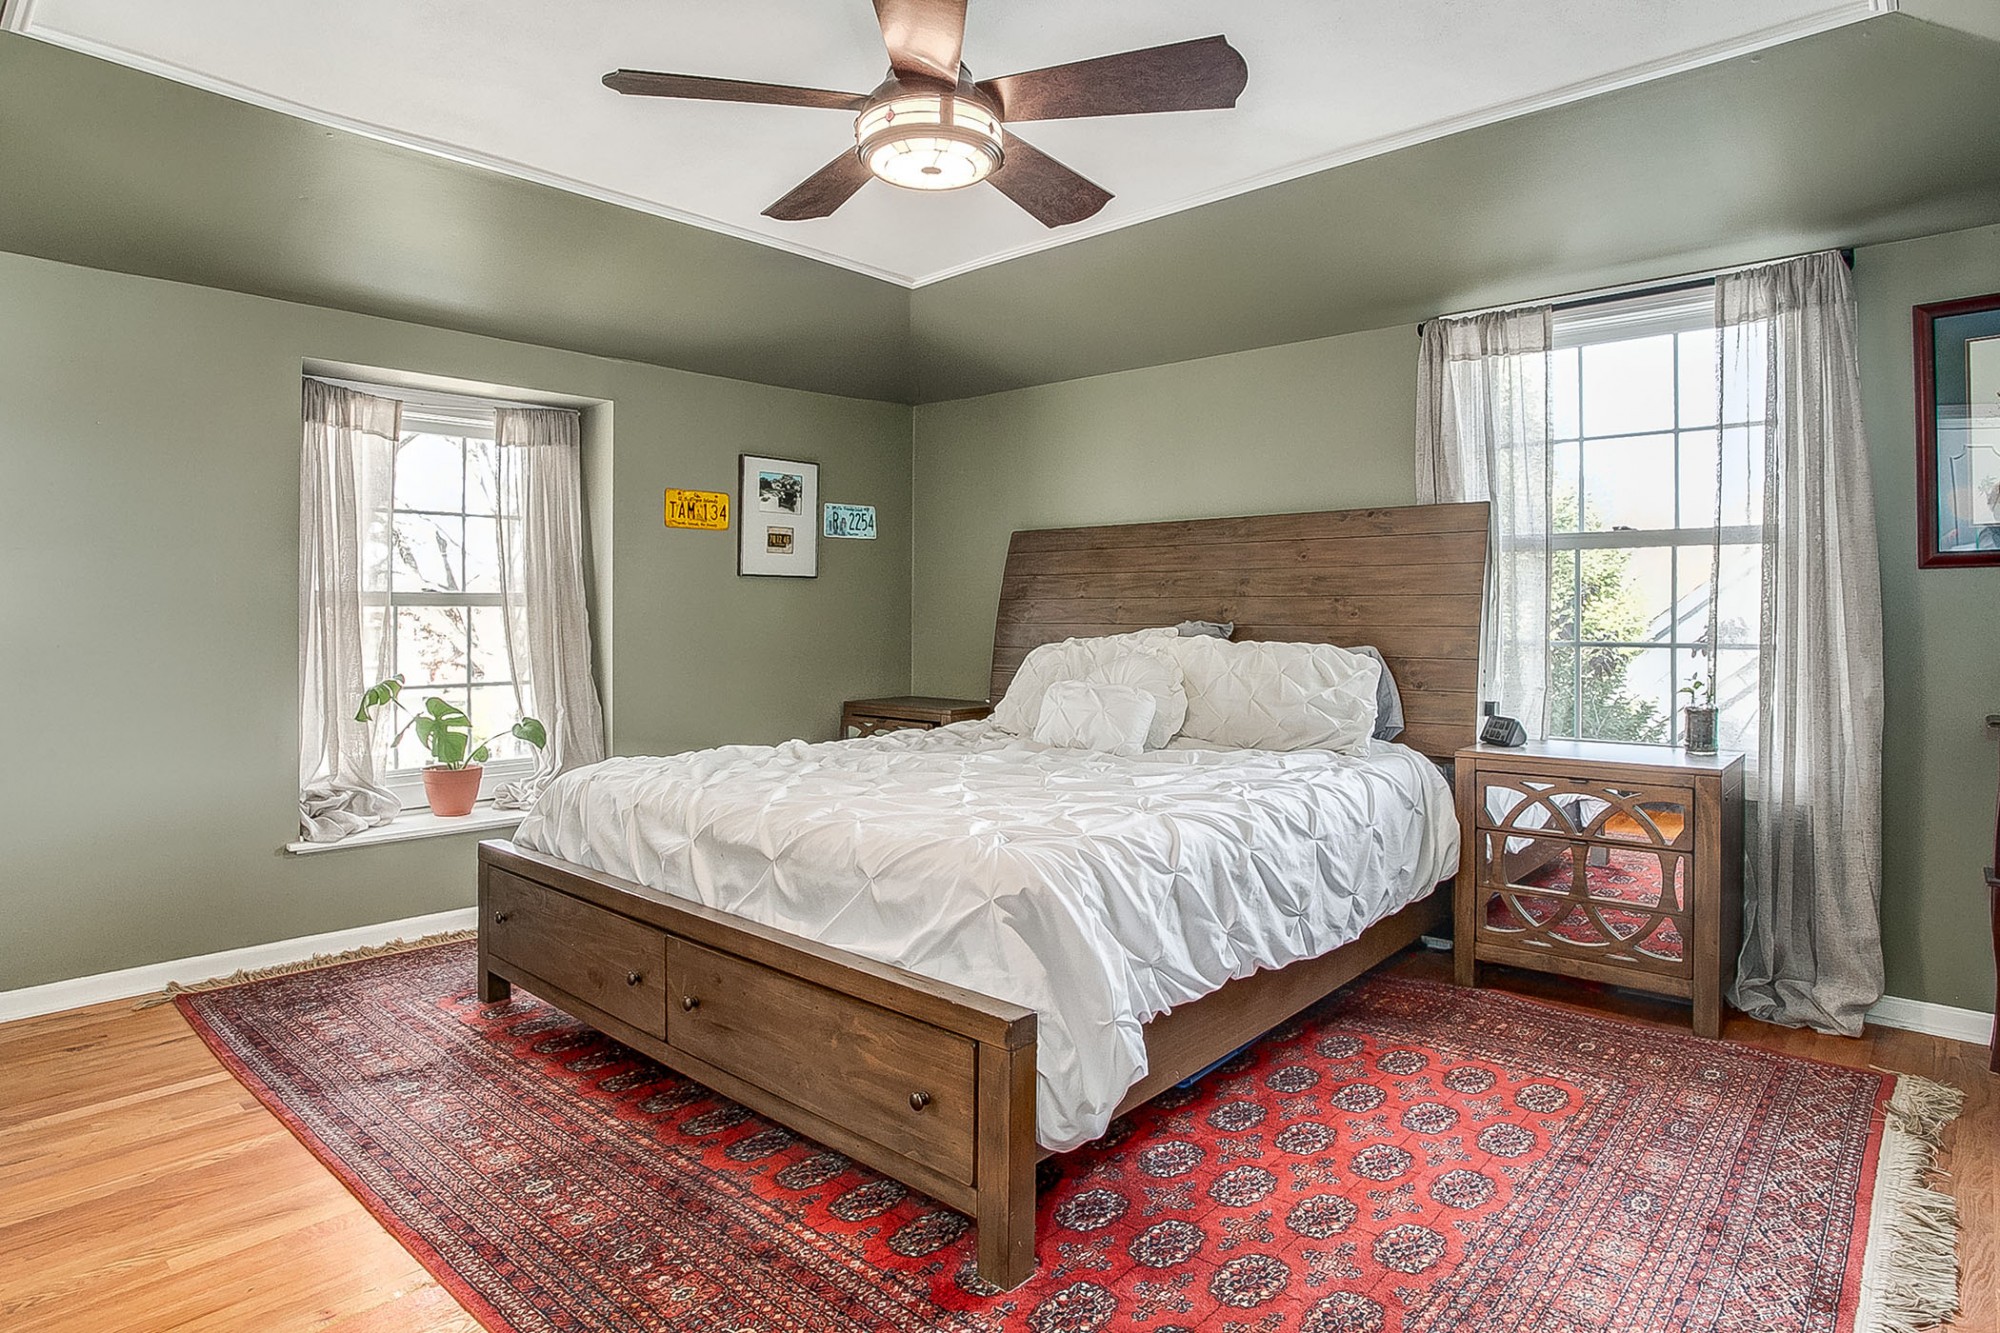 Ascend the stairs to the bedroom level. The spacious master suite highlights hardwood floors, stylish lighted ceiling fan, and charming windows.